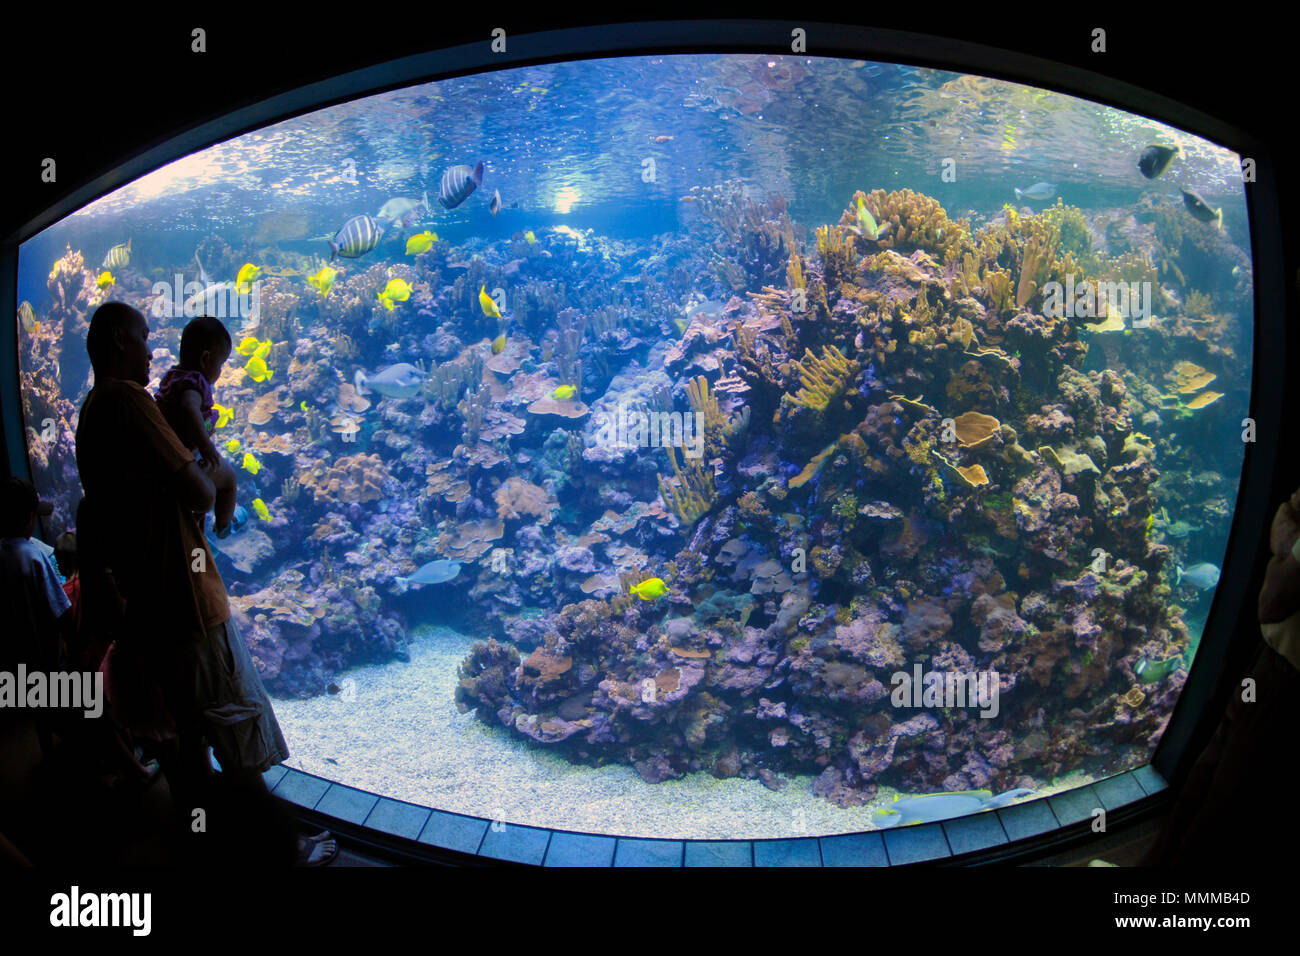 Hawaiian coral reef scene, with several yellow tangs, Zebrasoma flavescens, on display at the Maui Ocean Center, Maui, Hawaii, USA Stock Photo